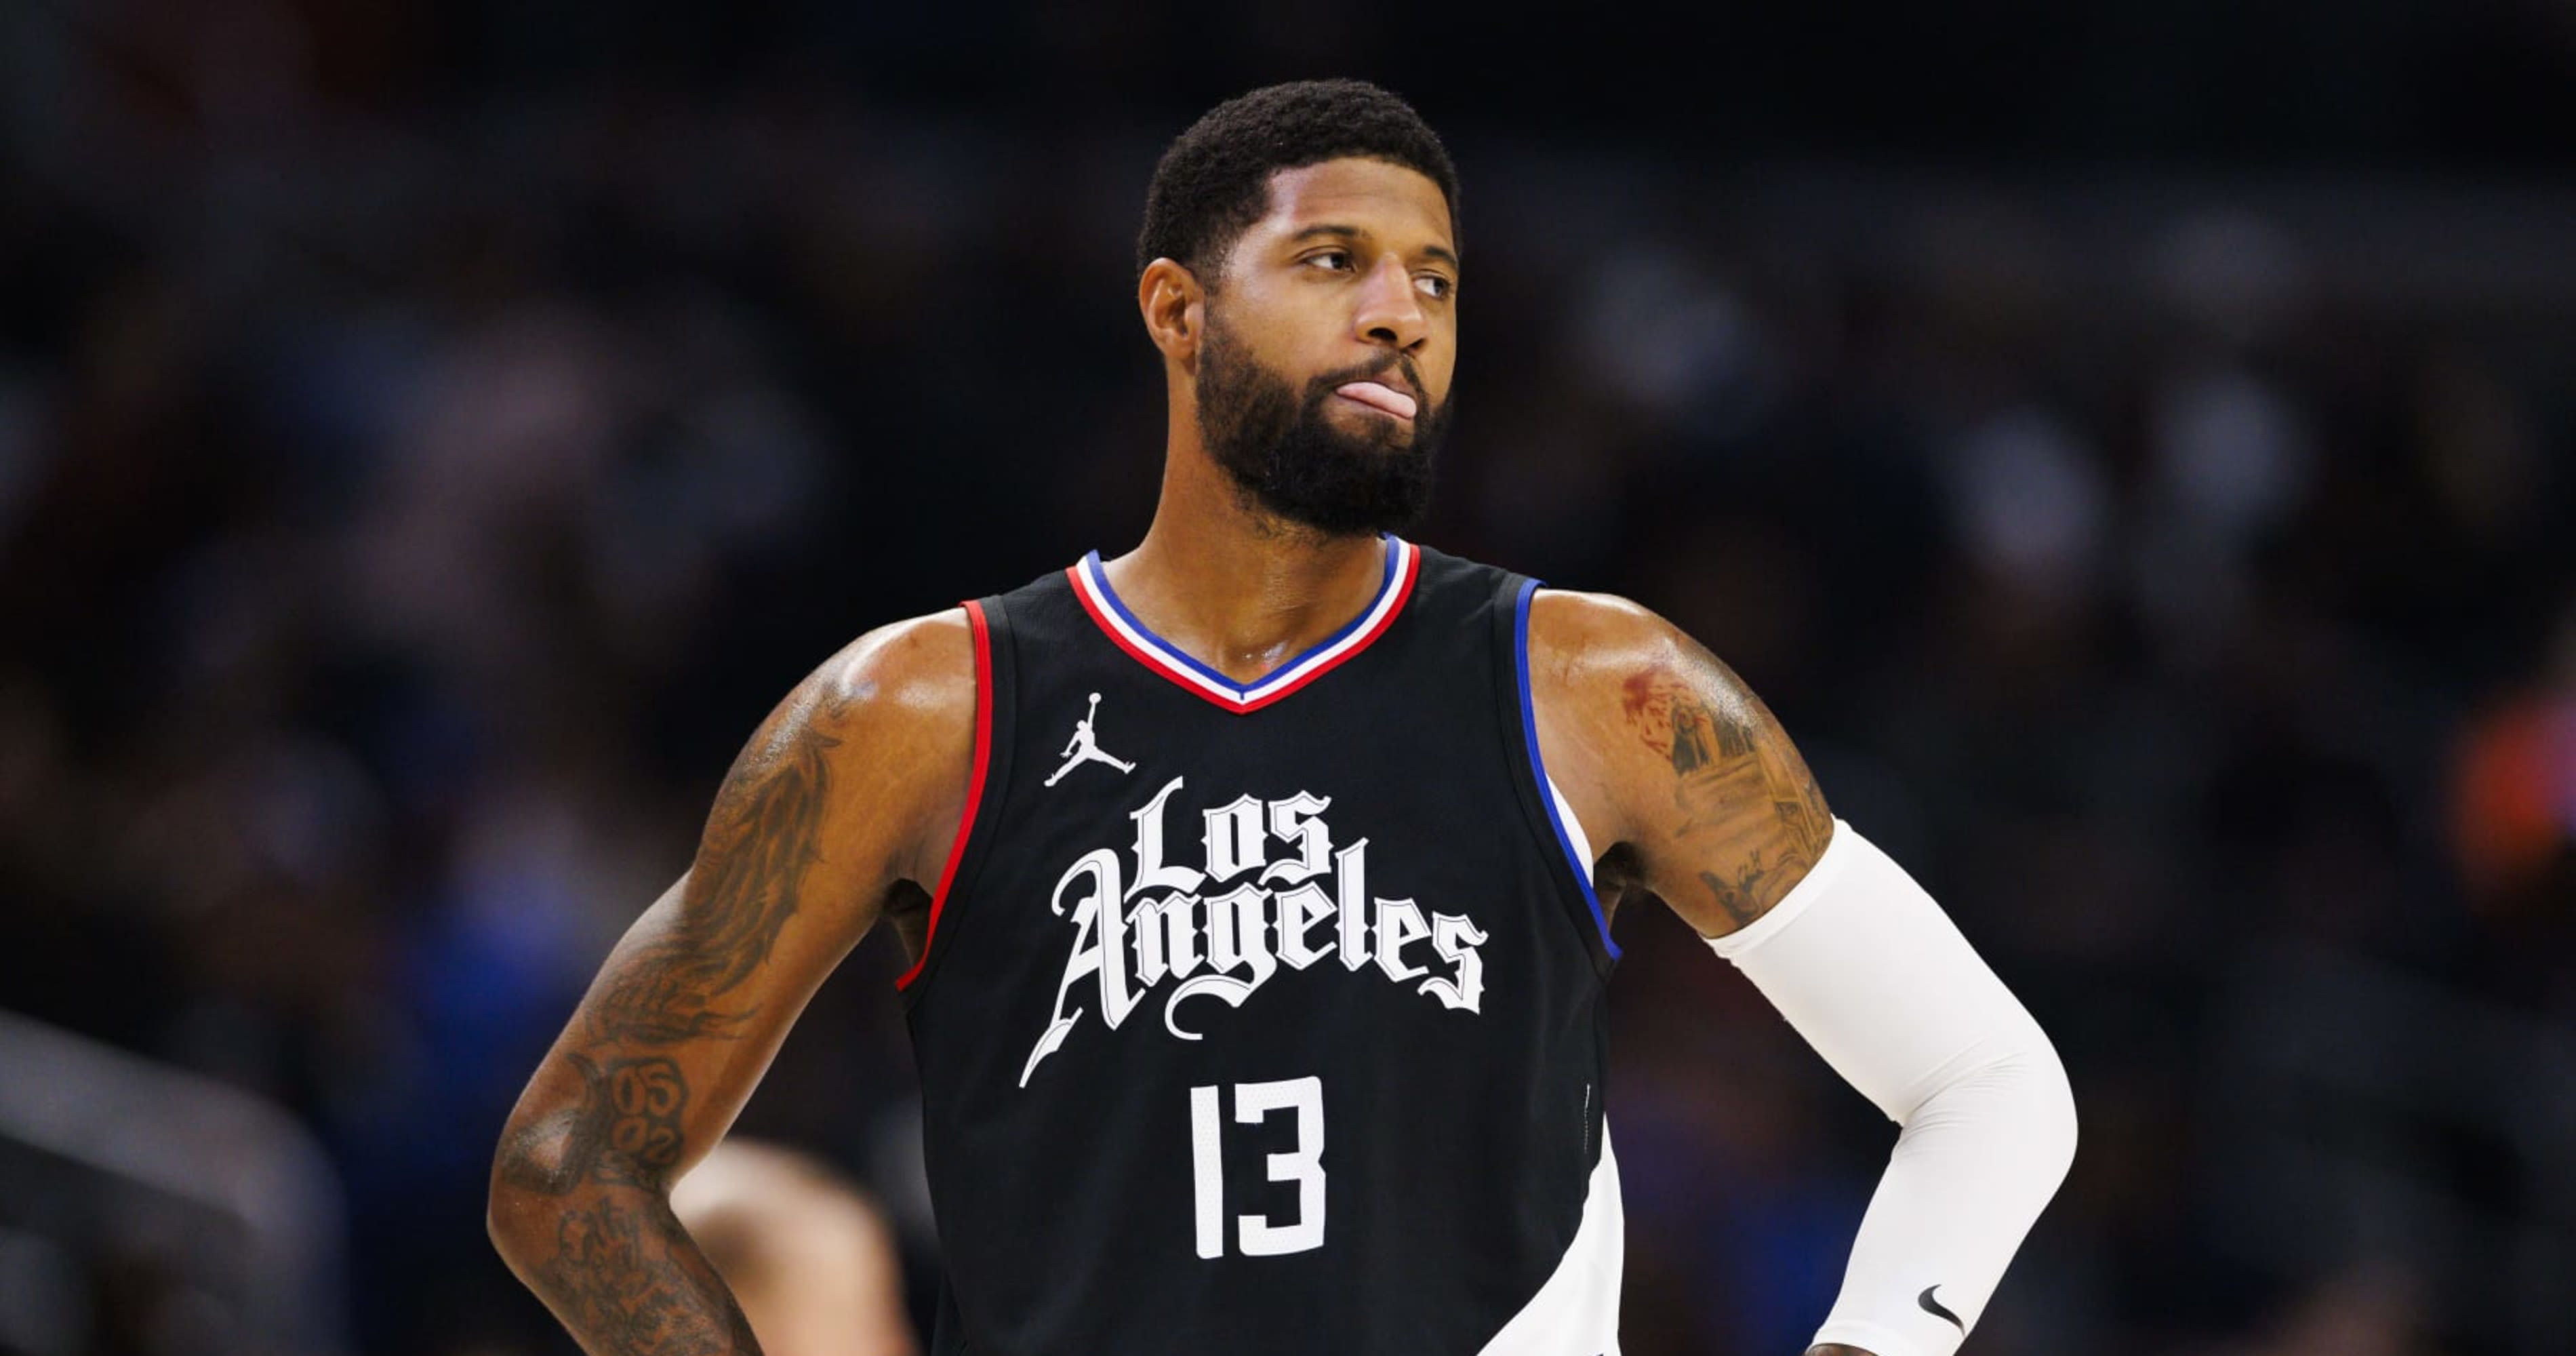 Paul George to New York Knicks and 5 Other NBA Free-Agent Moves That Should Happen